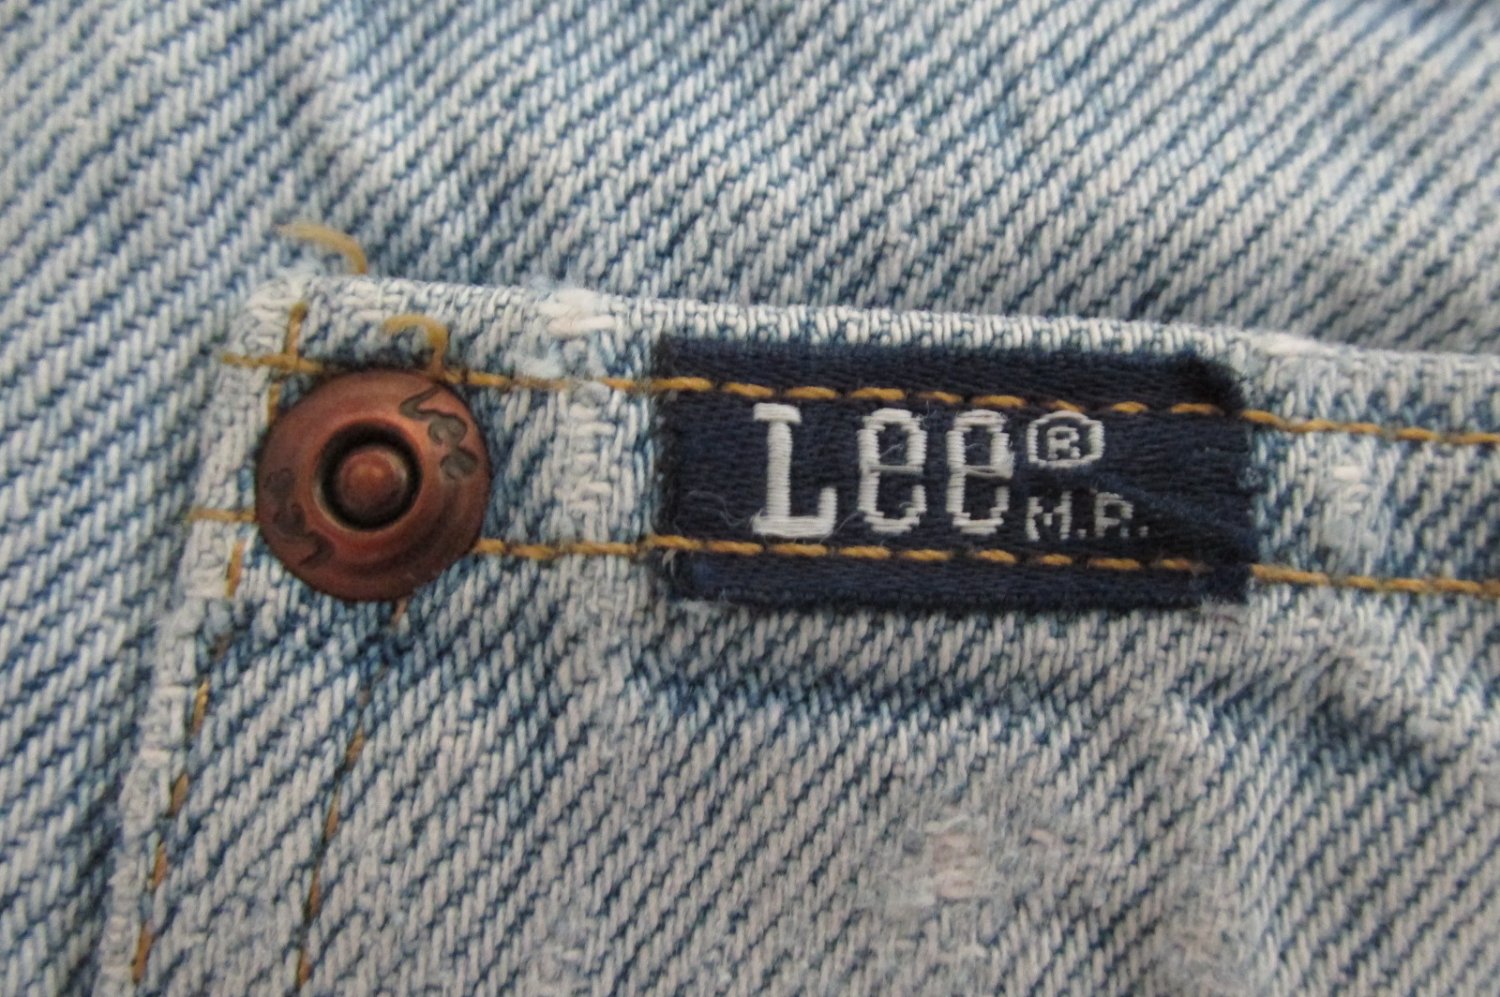 LEE 1889 MEN'S SIZE 34 X 28 JEANS LIGHT BLUE STONE WASHED 80'S STRAIGHT ...